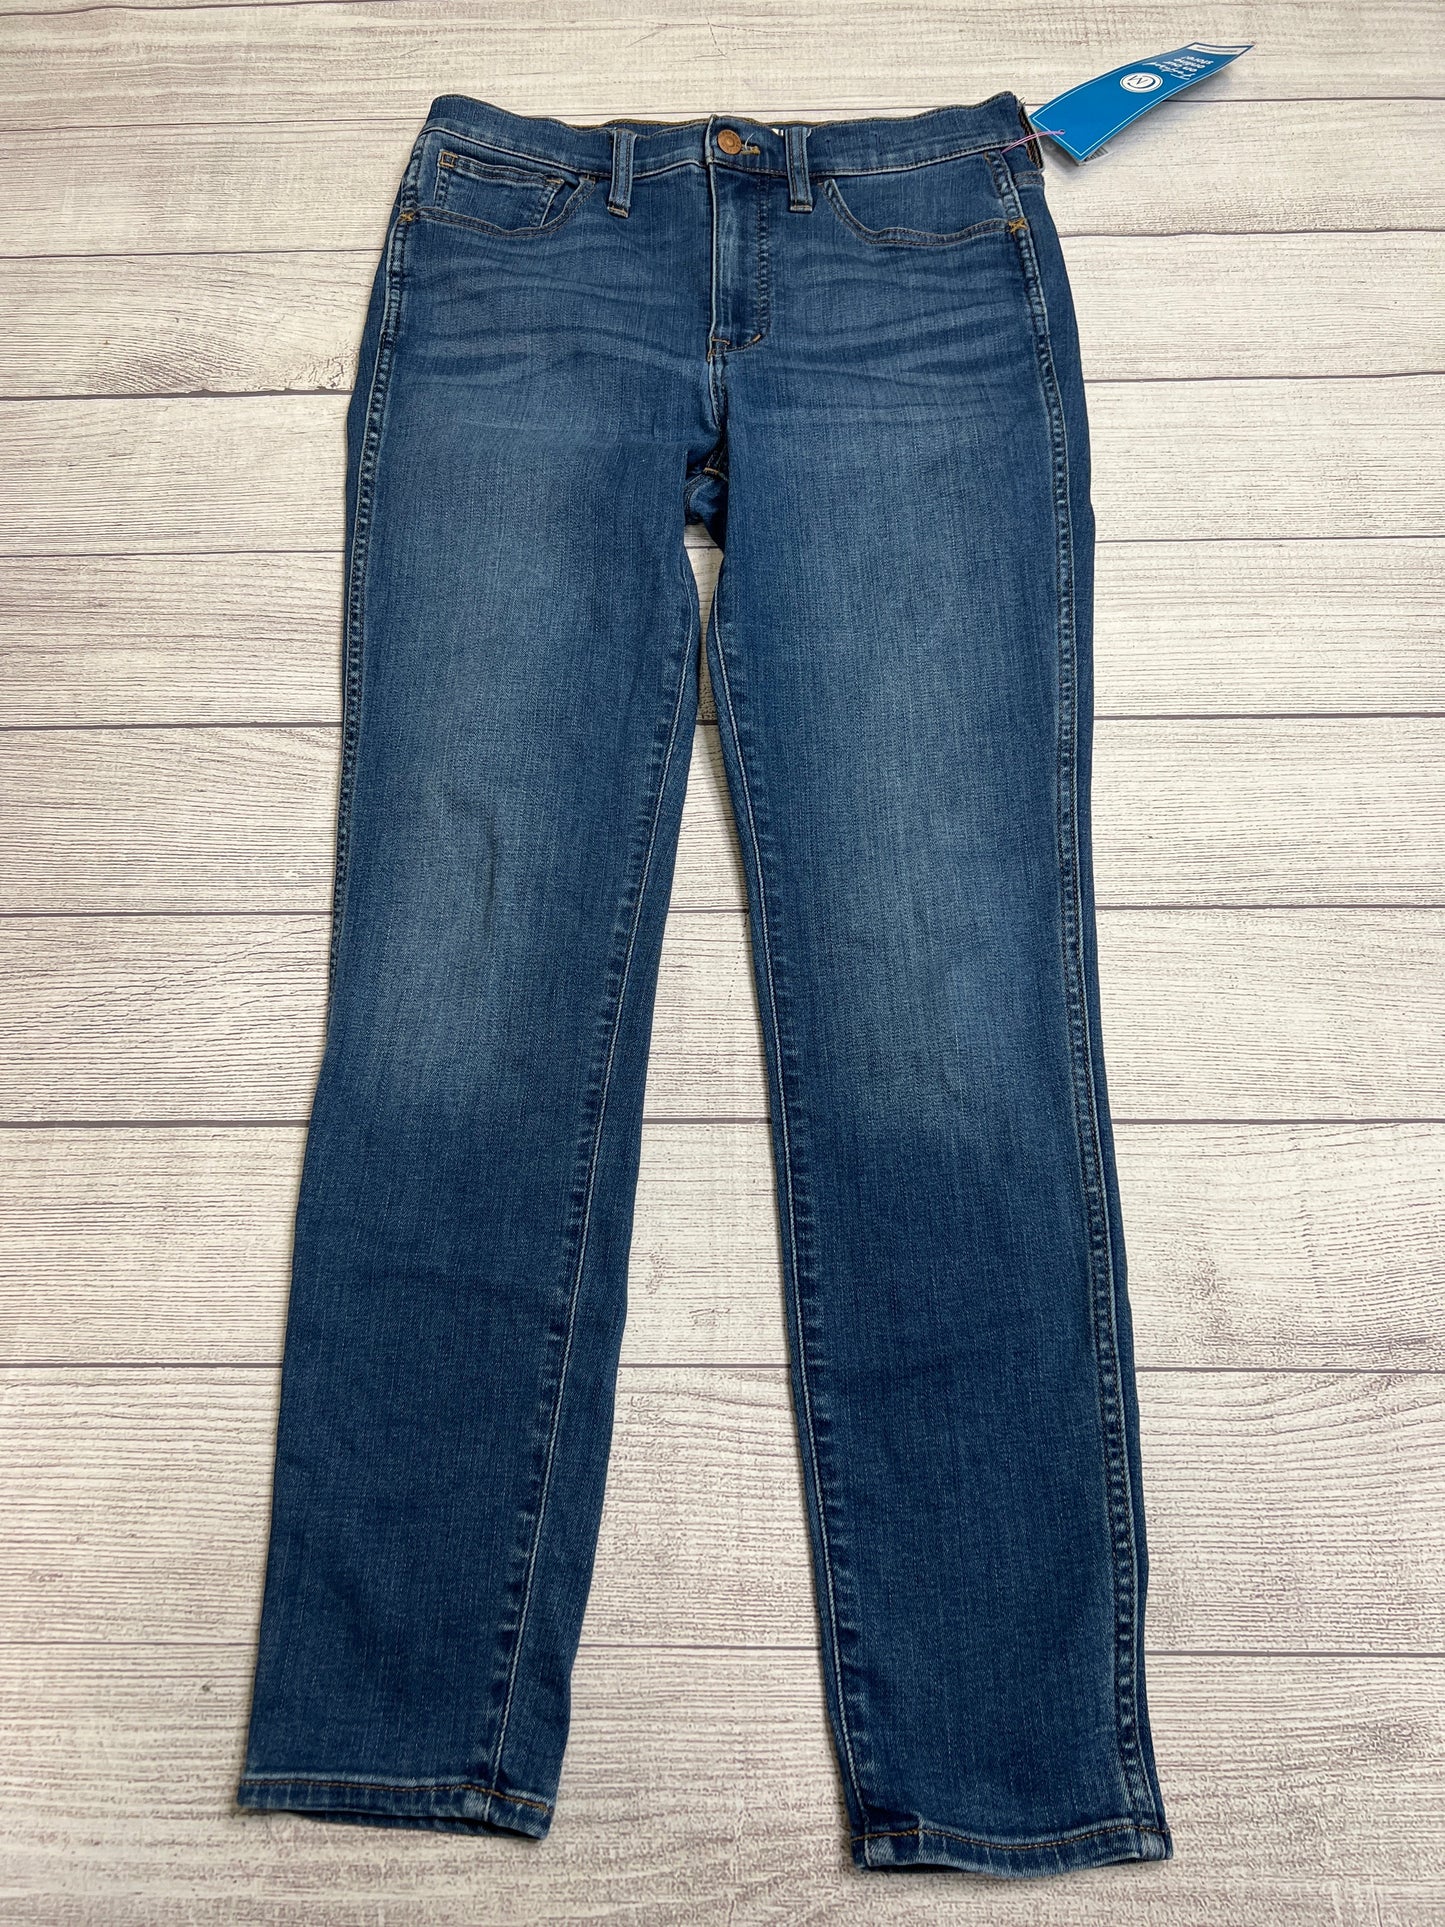 Jeans Designer By Madewell  Size: 6/28